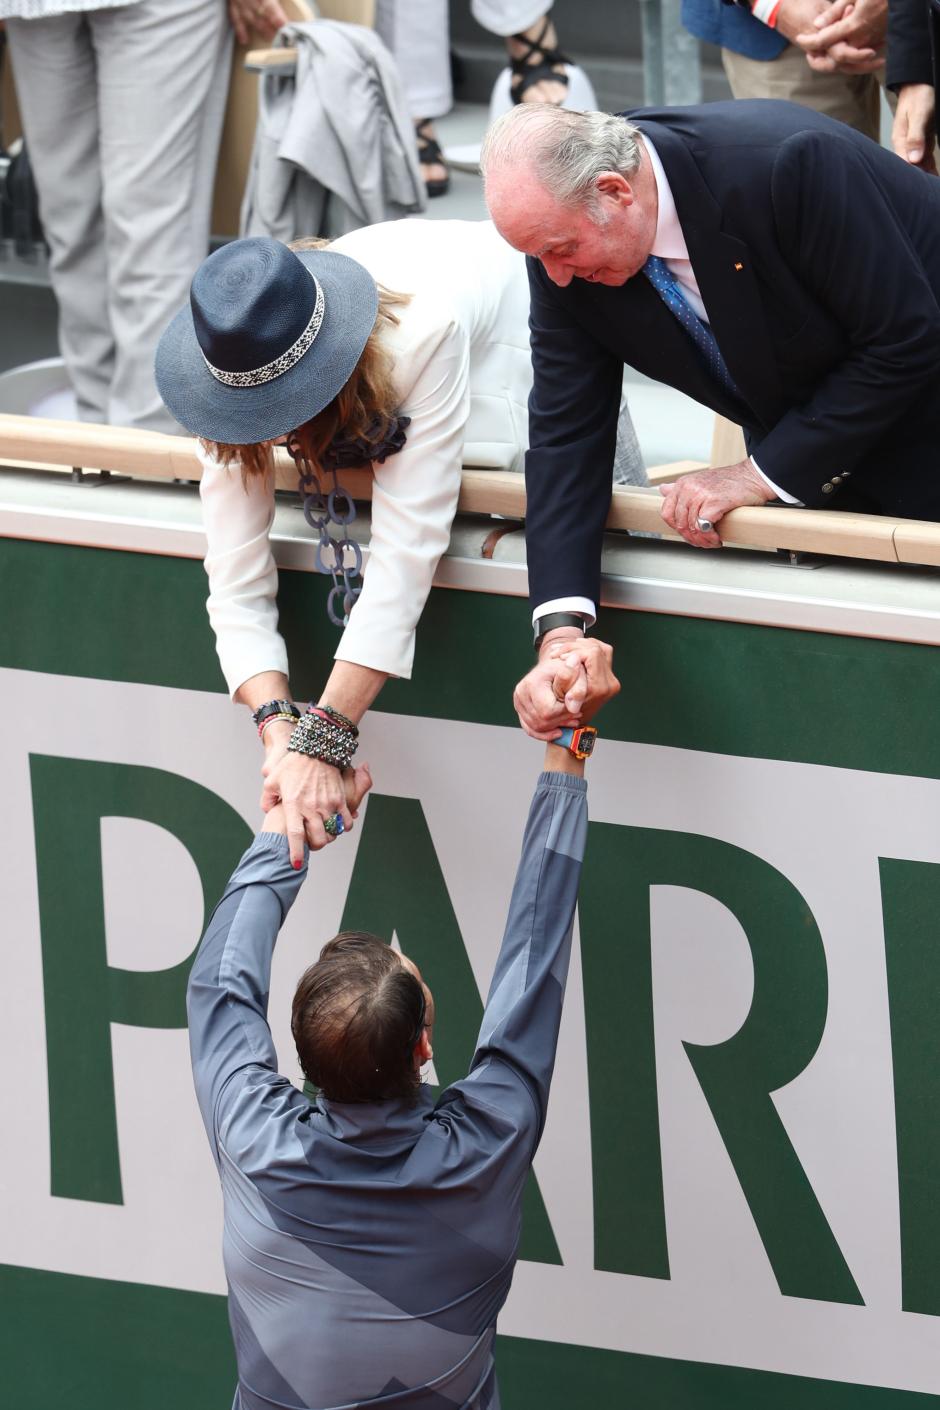 King Juan Carlos of Spain and his daughter Infanta Elena of Borbon with Rafael Nadal attend the finals of the Roland Garros 2019 in Paris on June 9, 2019.